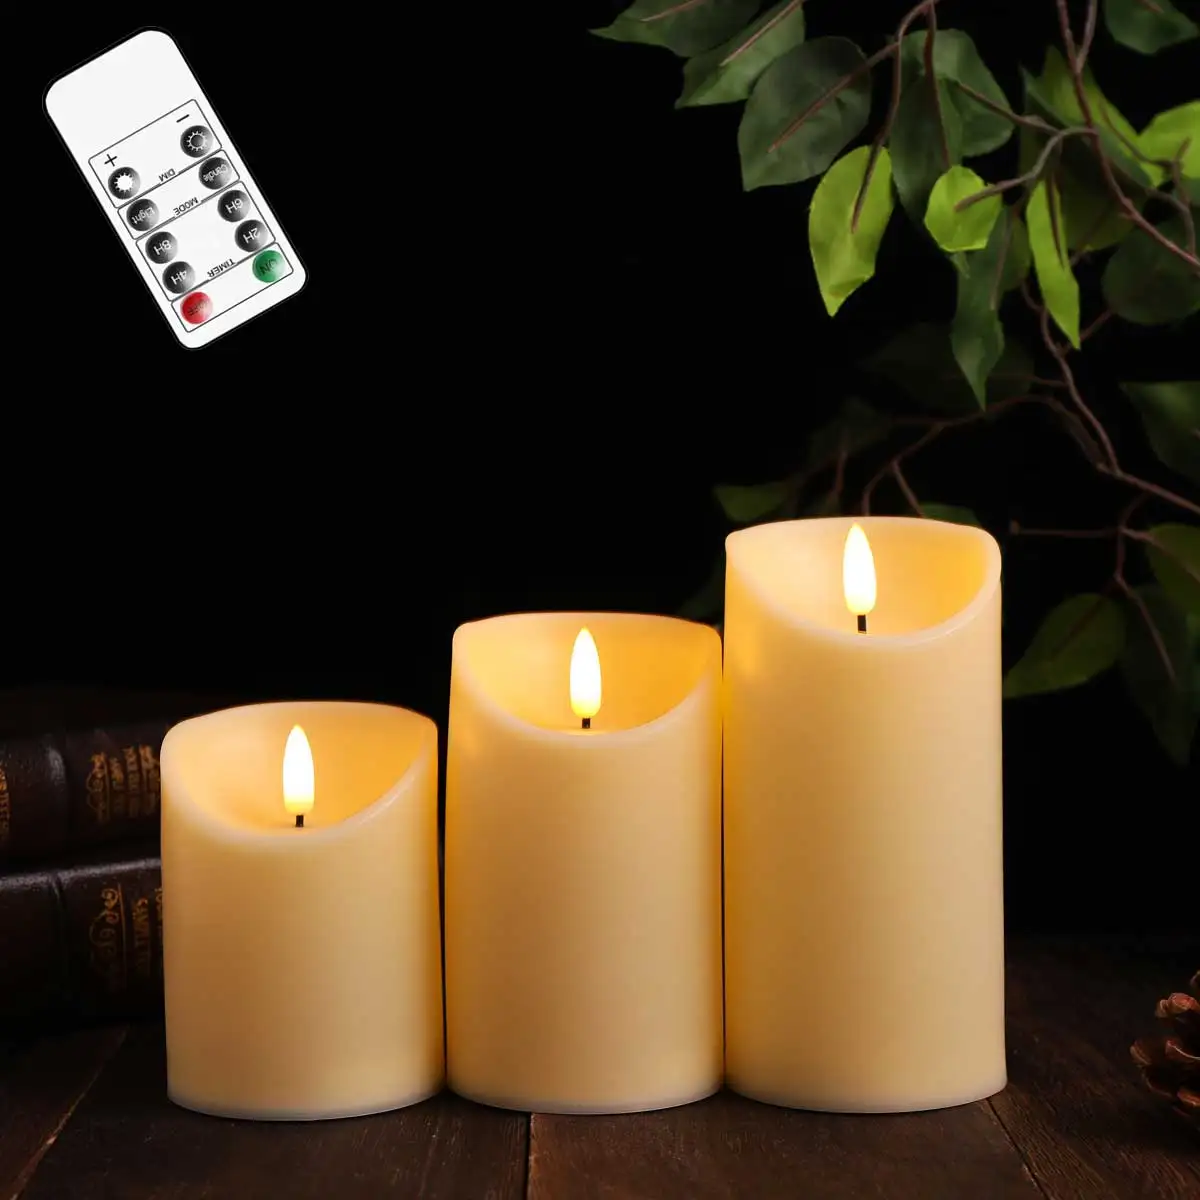 

Pack of 3 Remote Control Battery Operated Pillar Candles,Flameless Flickering Electronic Decorative Votive Easter Candle Sets